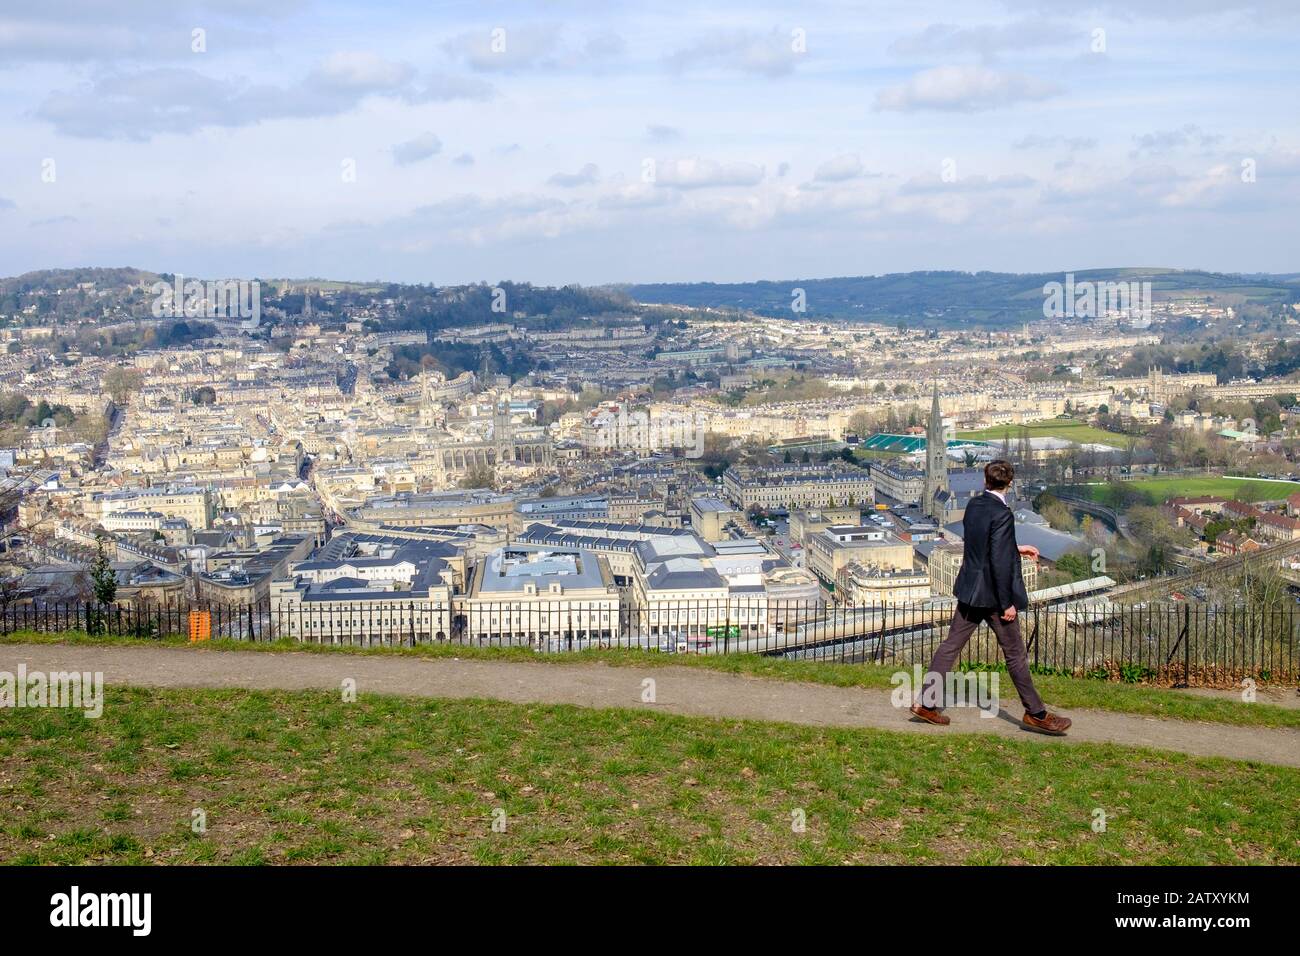 People taking advantage of the high vantage point view are pictured in Alexandra Park looking down at the city of Bath. Bath Somerset England uk Stock Photo